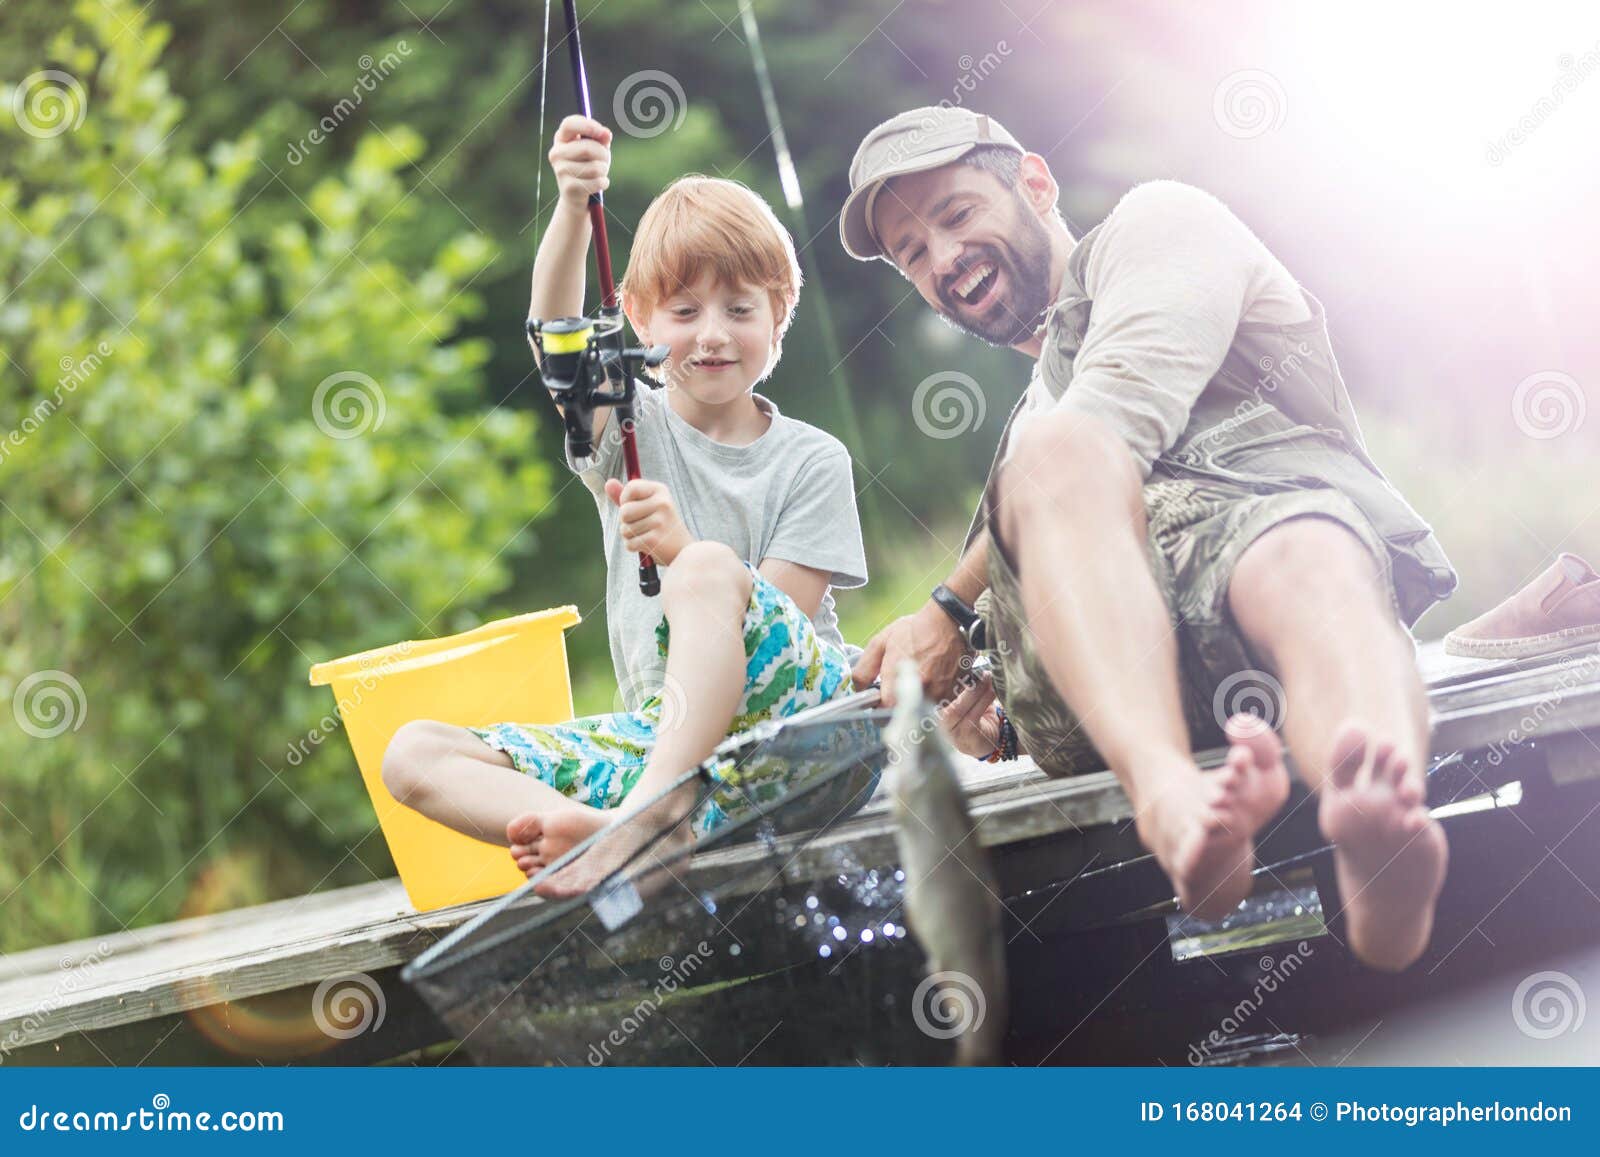 1,496 Child Fishing Net Stock Photos - Free & Royalty-Free Stock Photos  from Dreamstime